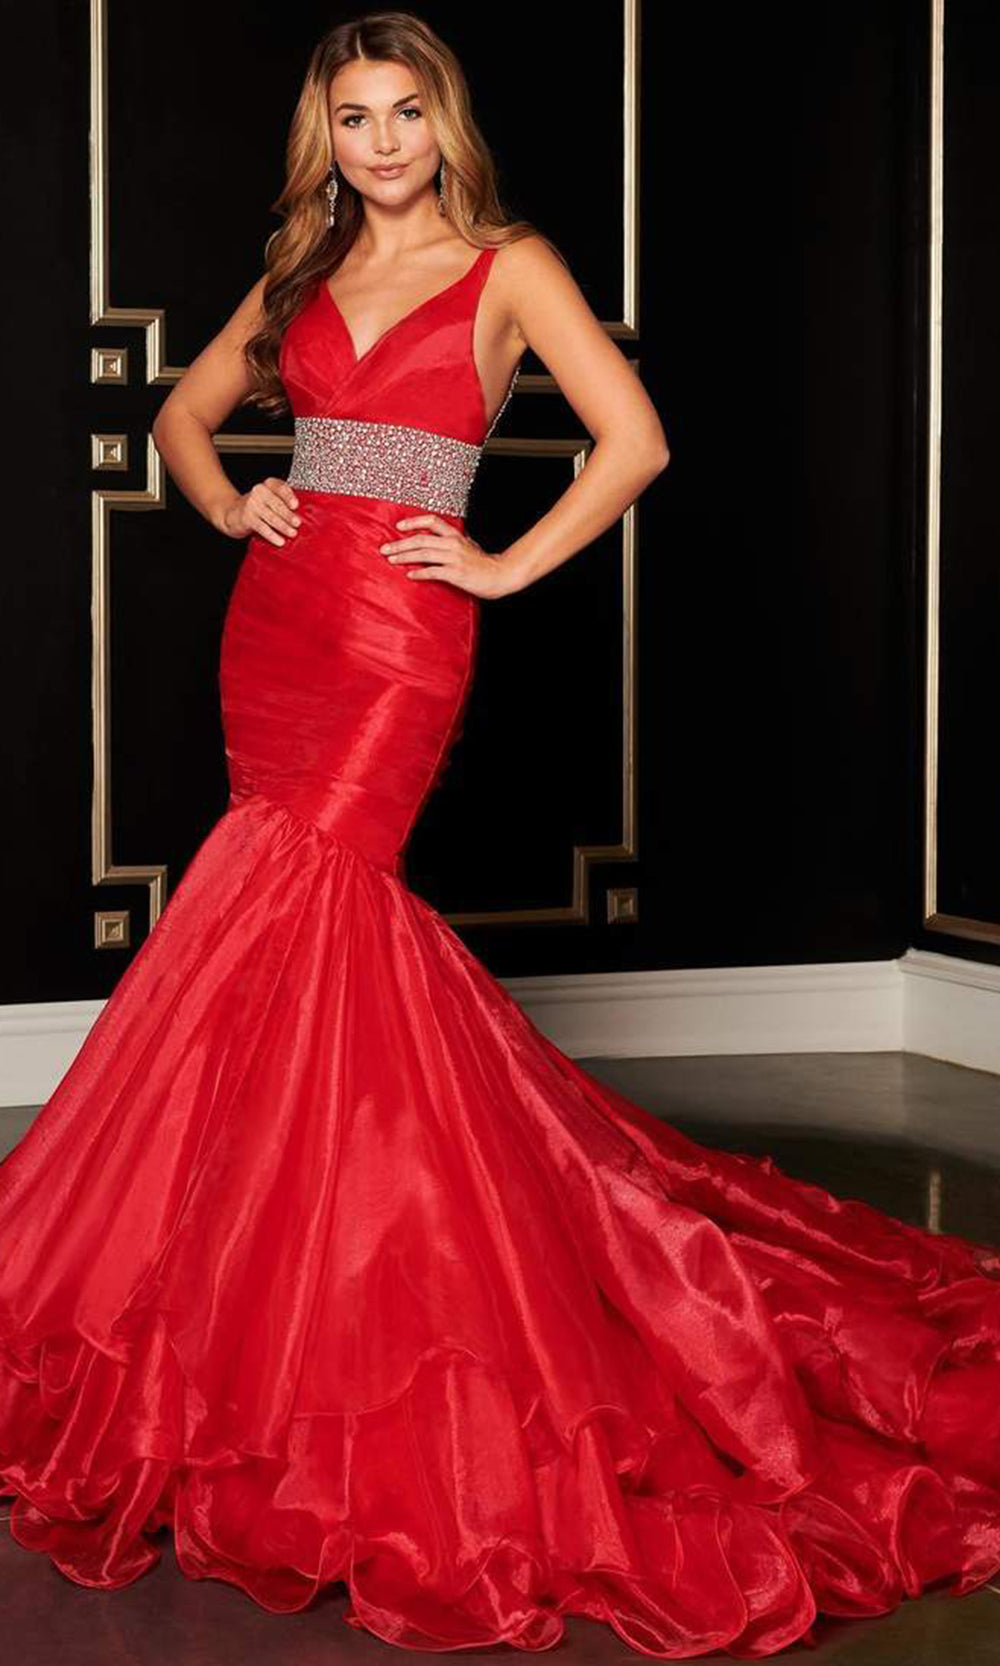 Rachel Allan - Pleated V-Neckline Embellished Mermaid Dress 5108 - 1 pc Red In Size 10 Available CCSALE 10 / Red